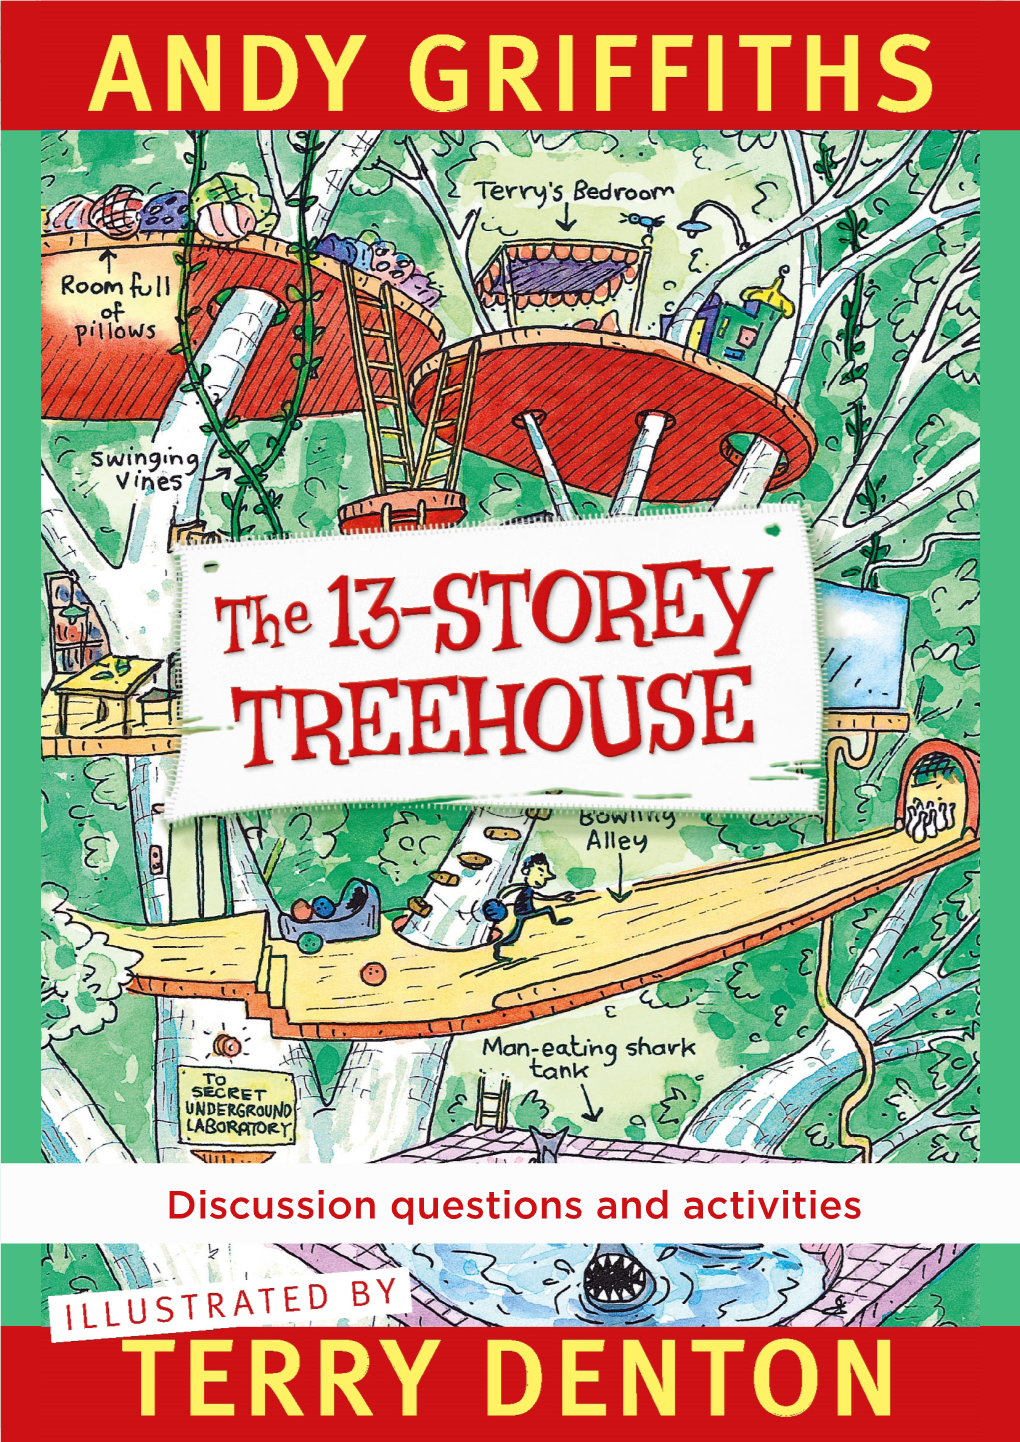 Discussion Questions and Activities the 13-STOREY TREEHOUSE by Andy Griffiths and Terry Denton